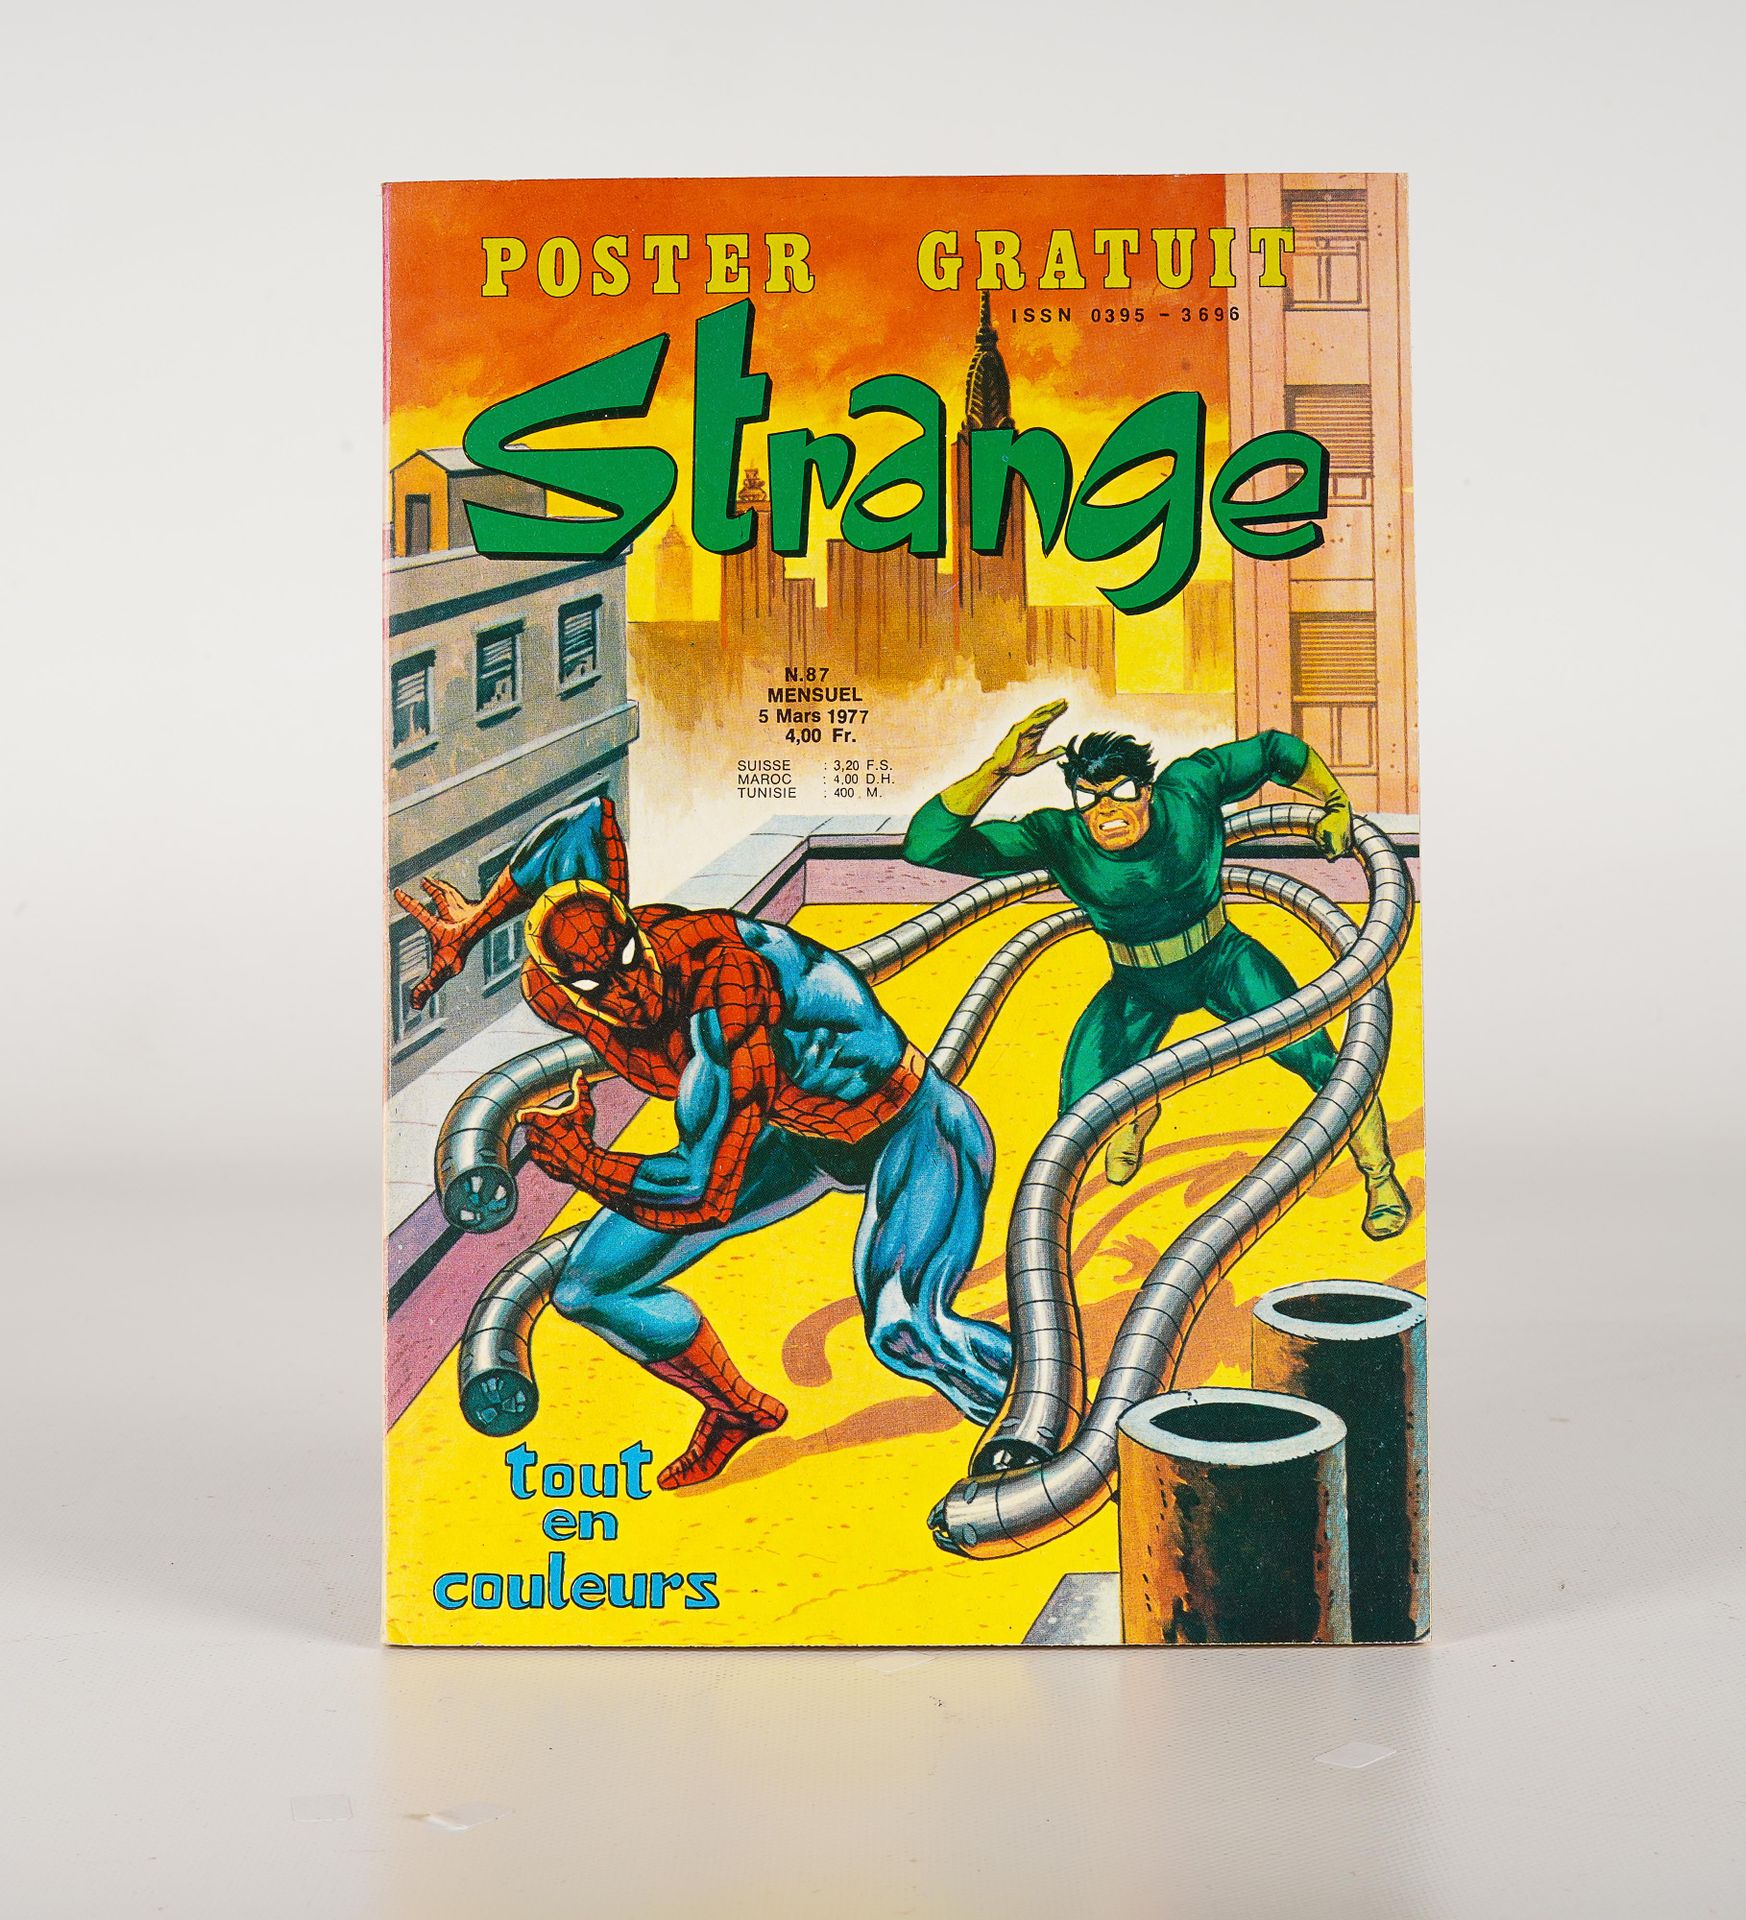 LUG SEMIC, ARCHIVES COMICS Strange No. 87 publisher LUG, with attached poster, s&hellip;